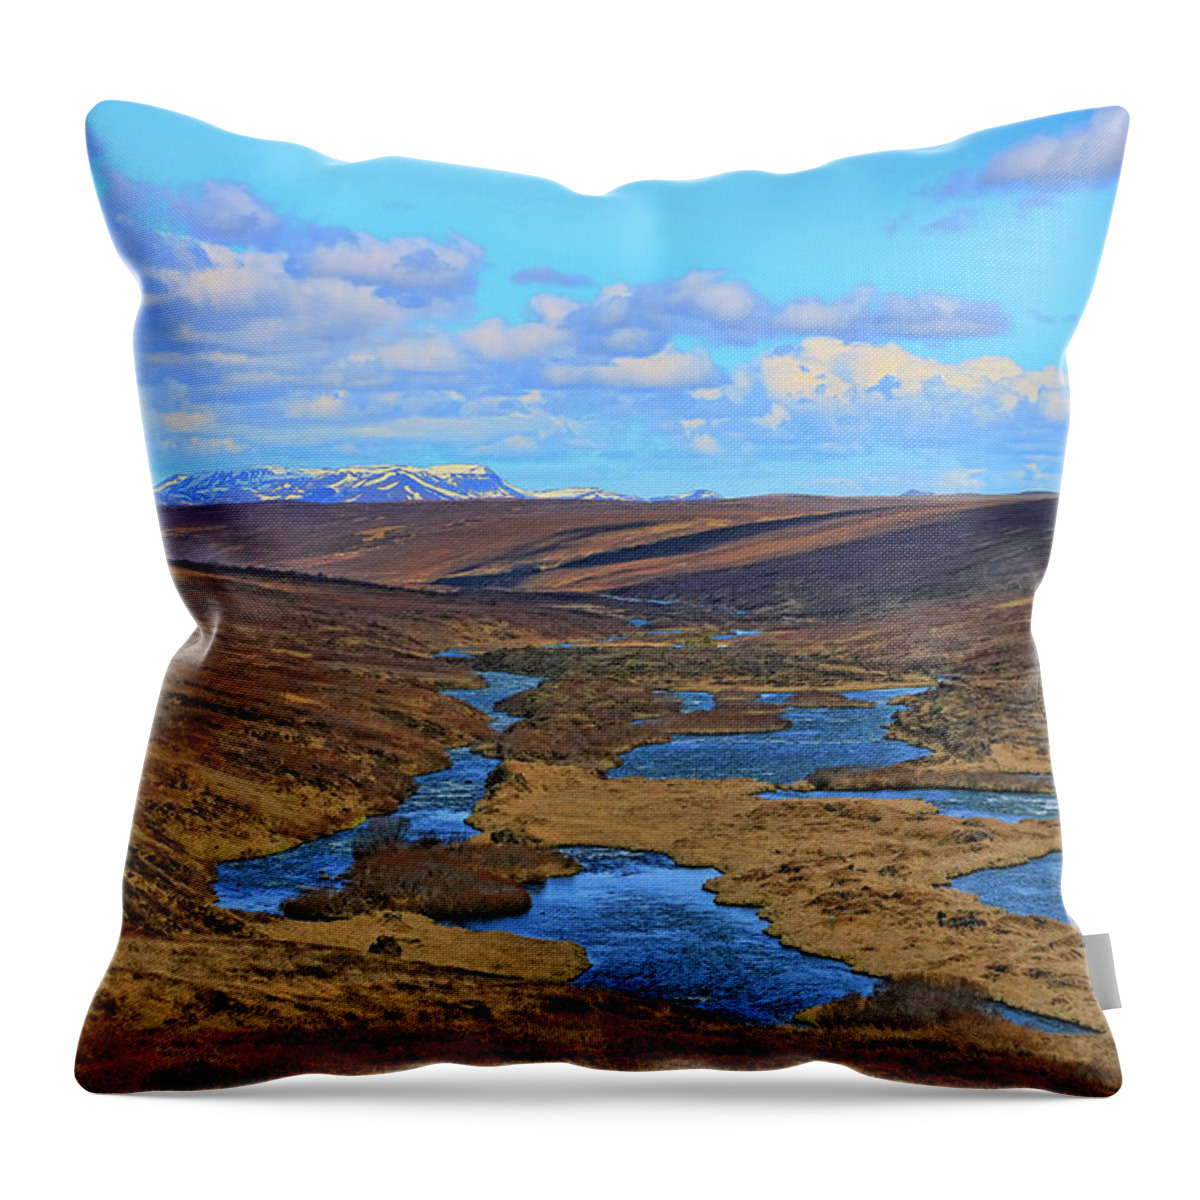 Iceland Throw Pillow featuring the photograph Iceland Landscape # 1 by Allen Beatty